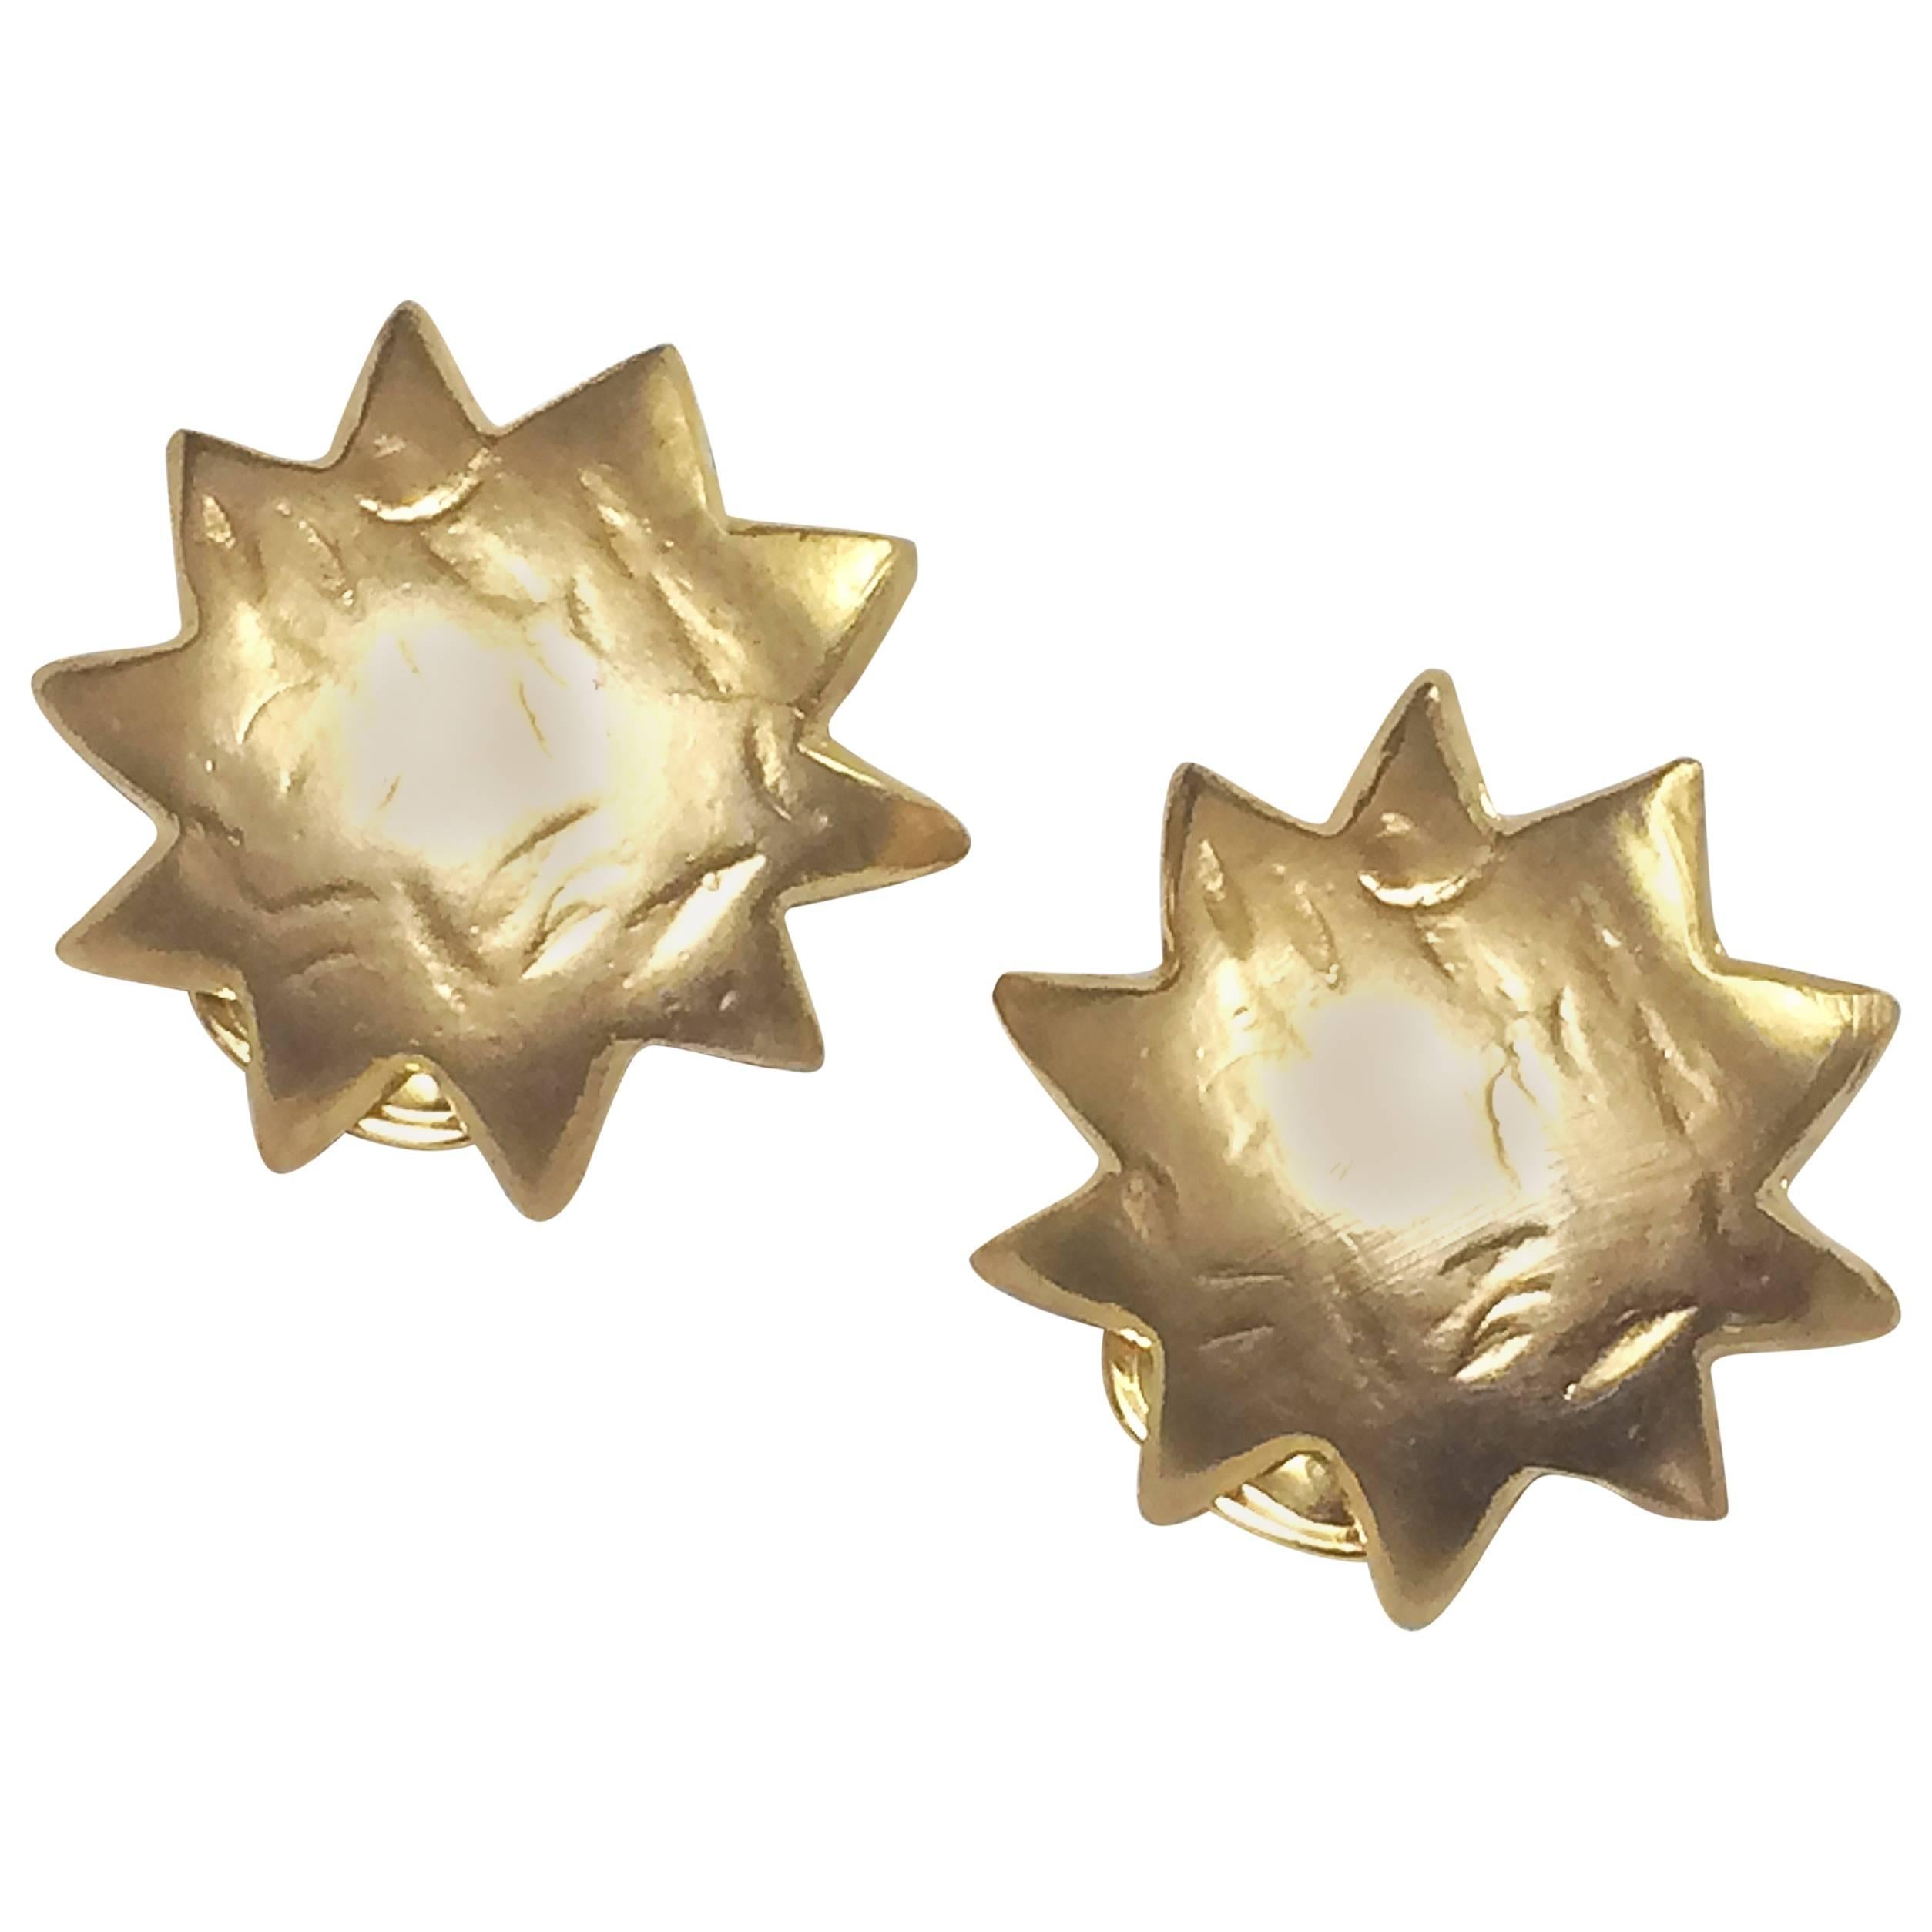 Vintage KENZO golden sun, star shape mod earrings. Chic and mod masterpiece. For Sale